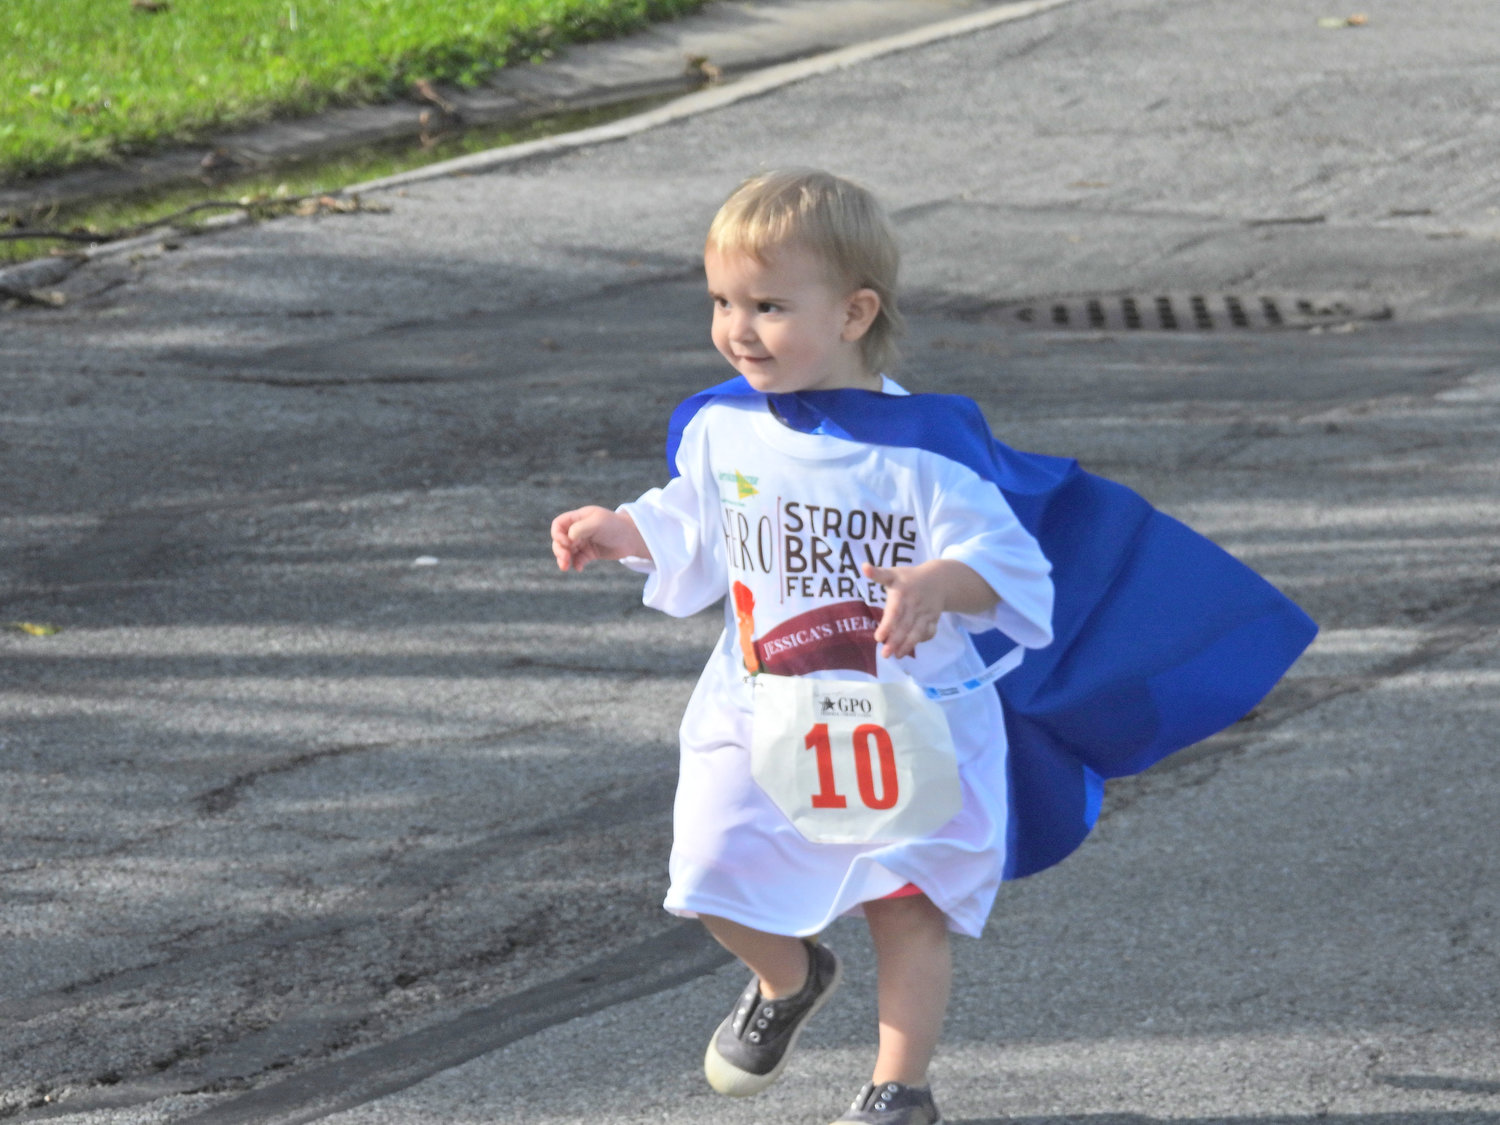 A young child takes off running for Jessica’s Heroes 5K Walk and Run, helping raise awareness and support for those in the community fighting cancer at the 2021 Jessica’s Heroes.